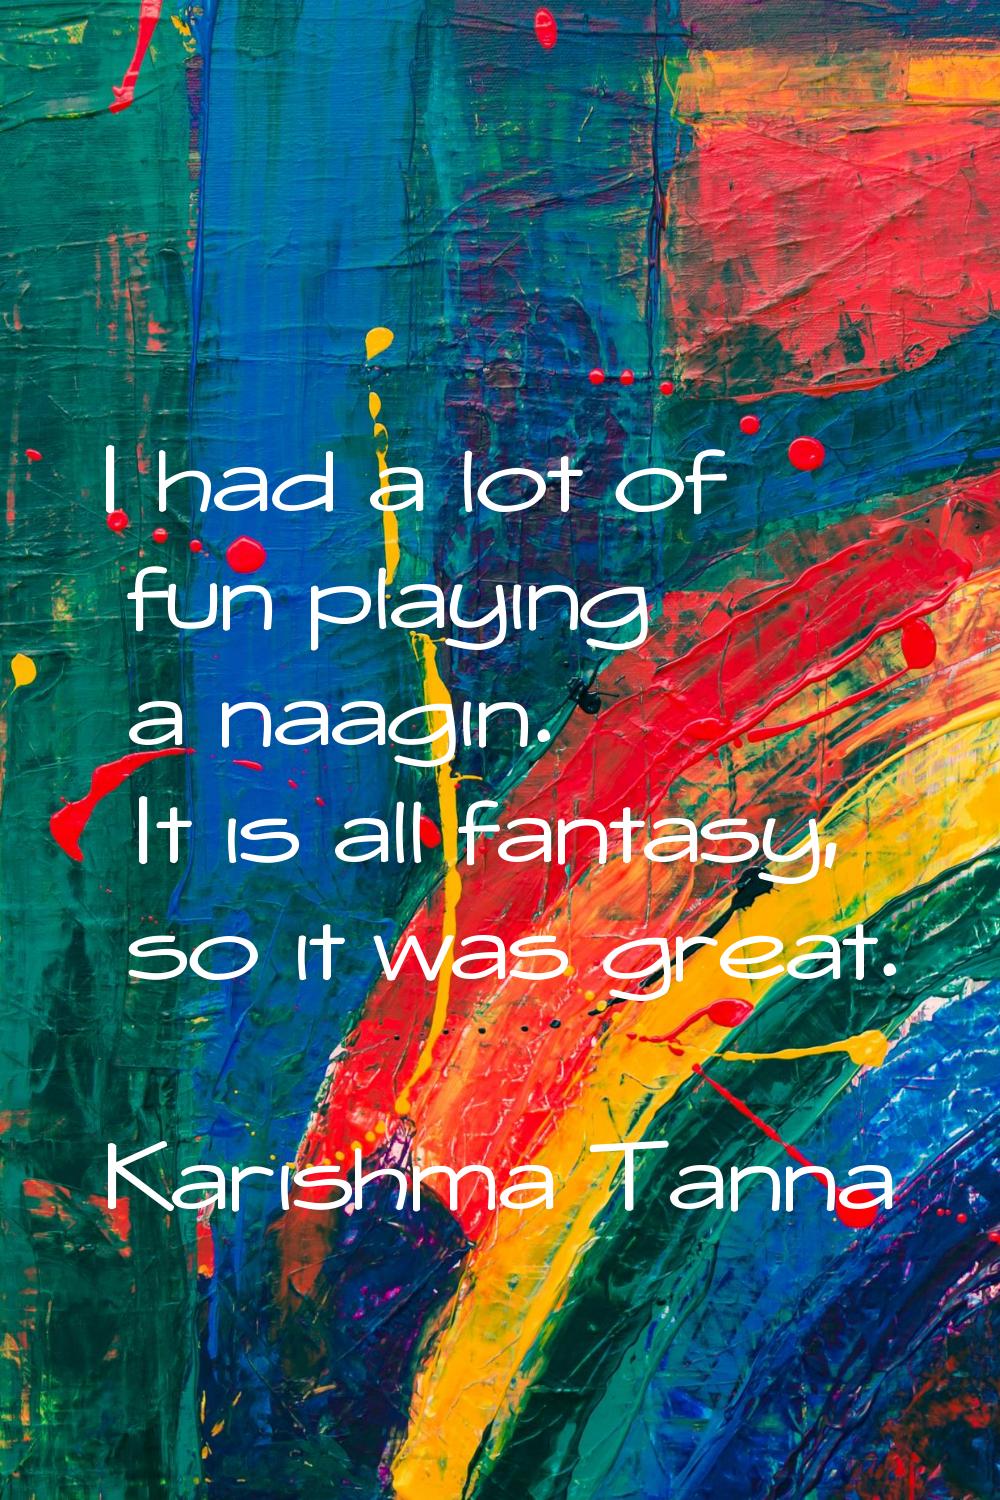 I had a lot of fun playing a naagin. It is all fantasy, so it was great.